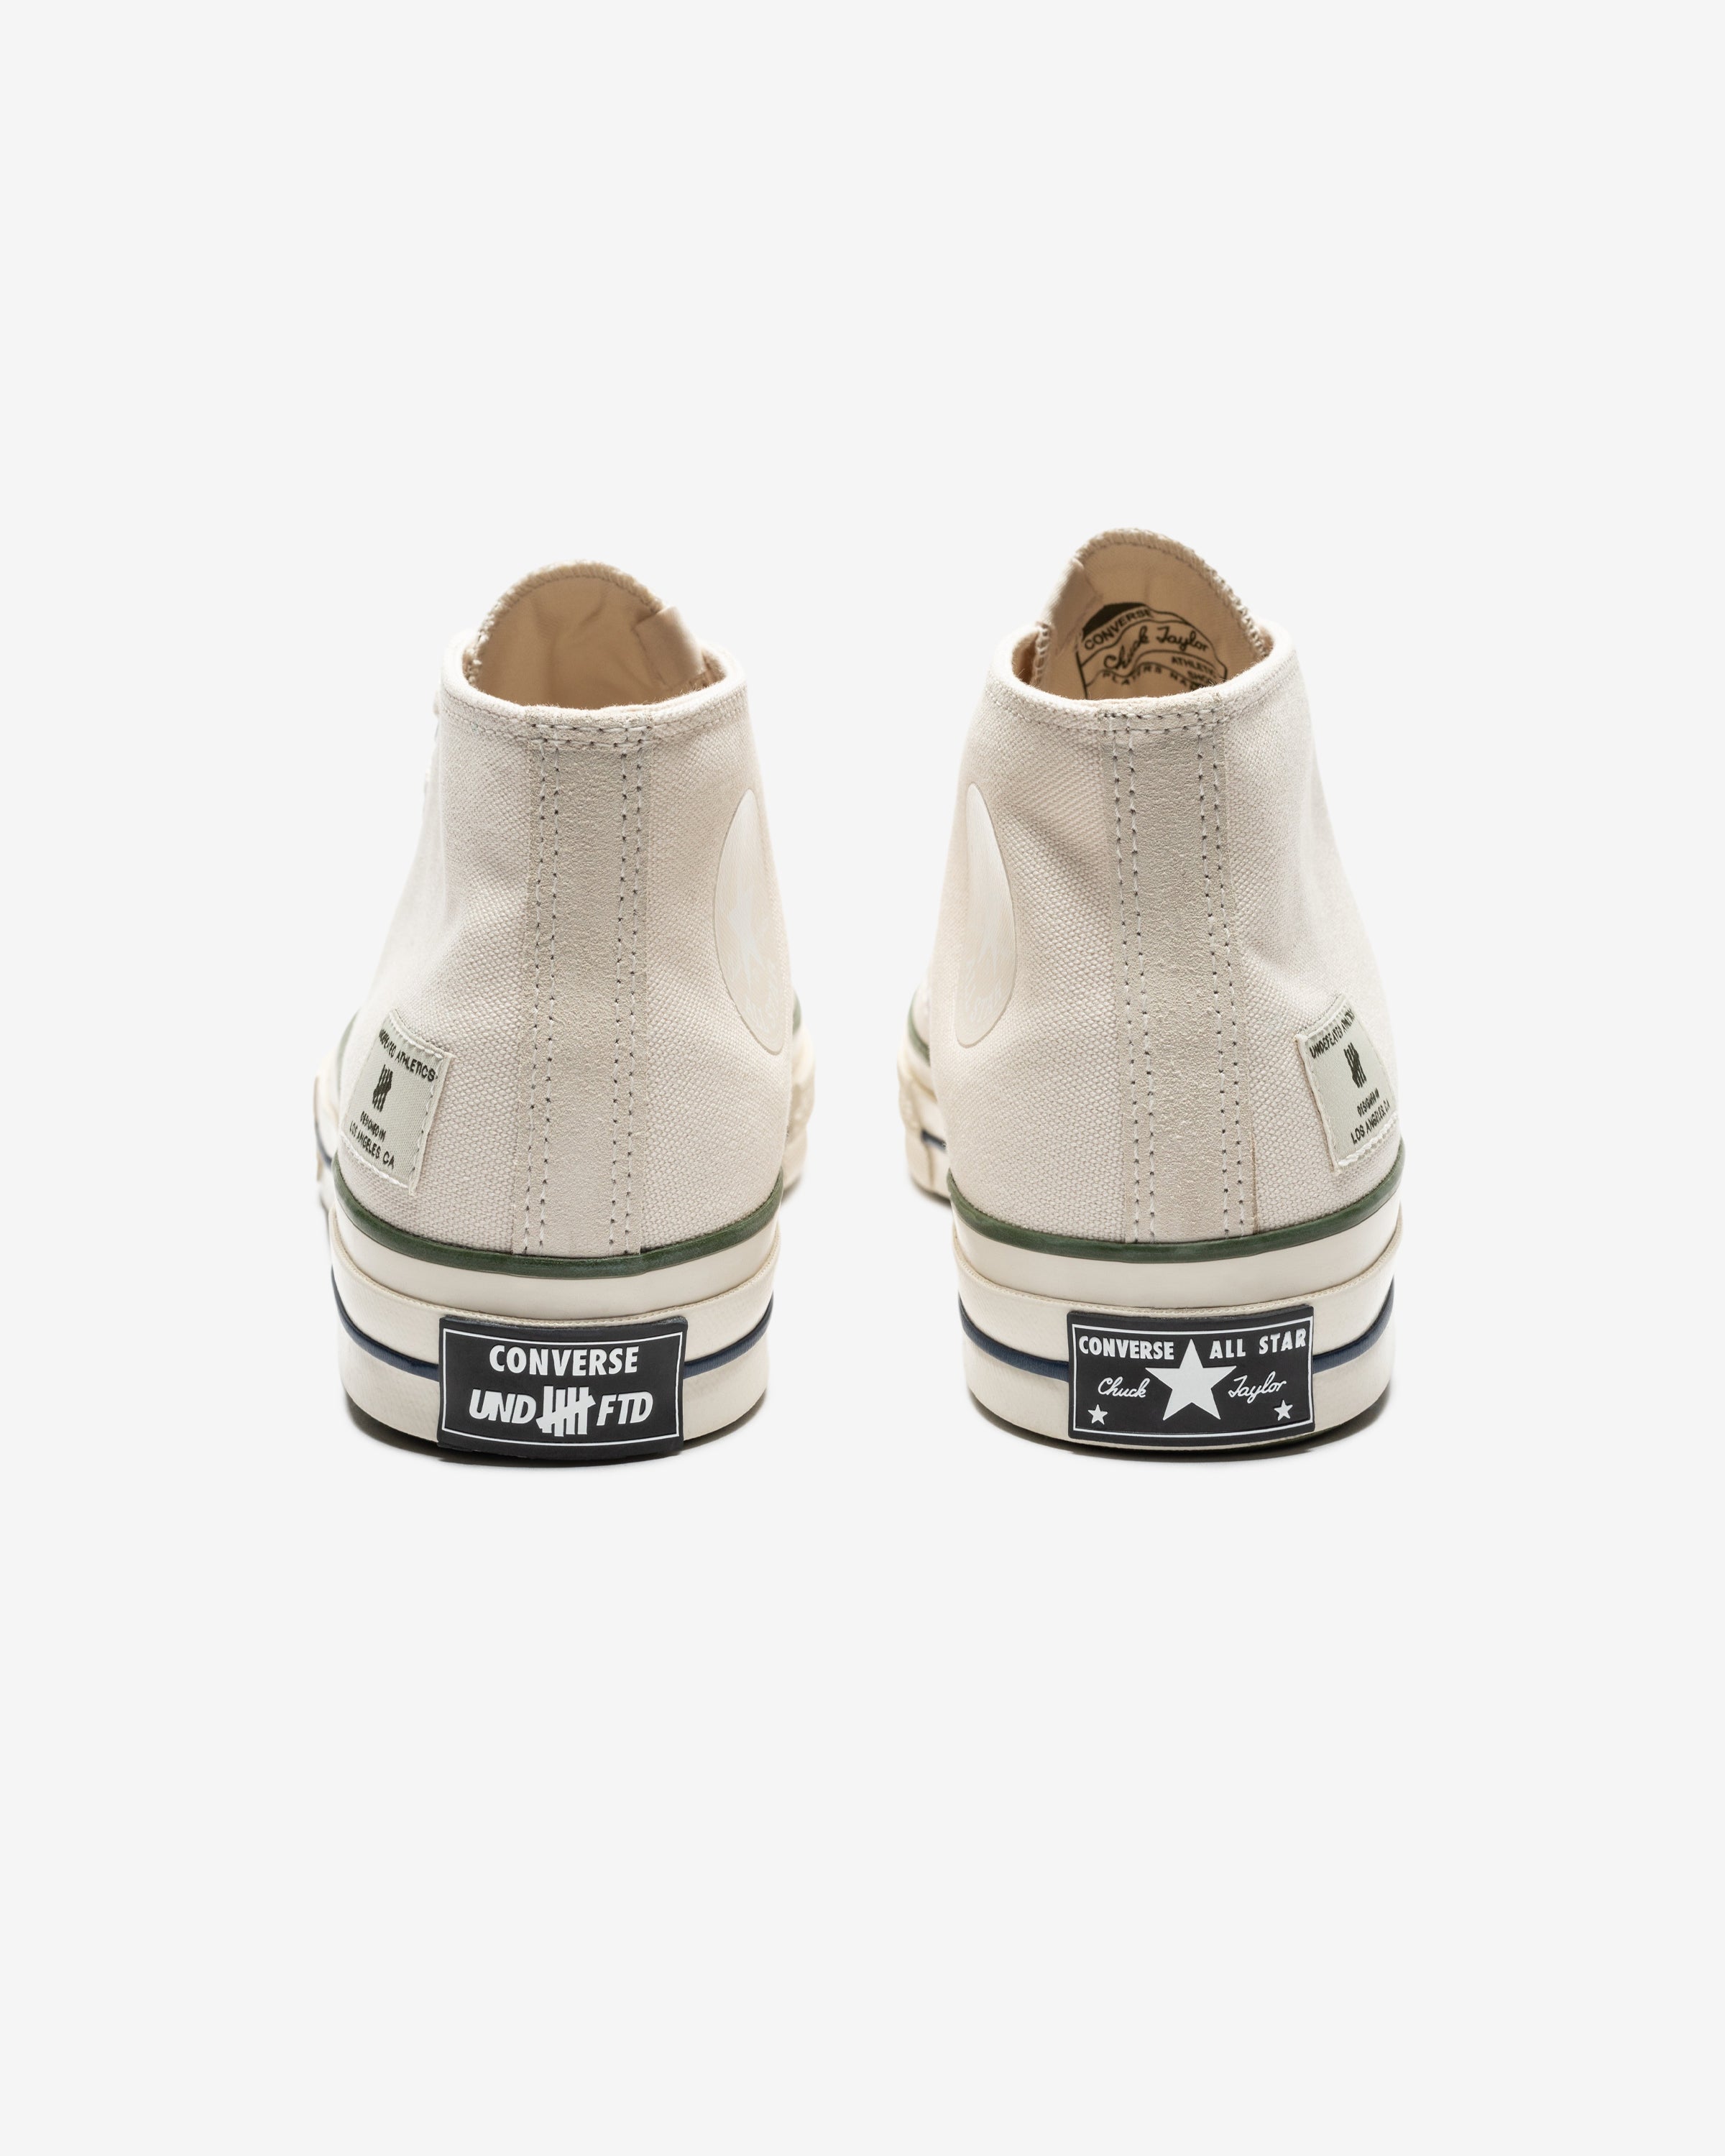 UNDEFEATED X CONVERSE CHUCK 70 MID- PARCHMENT/ CHIVE – Undefeated